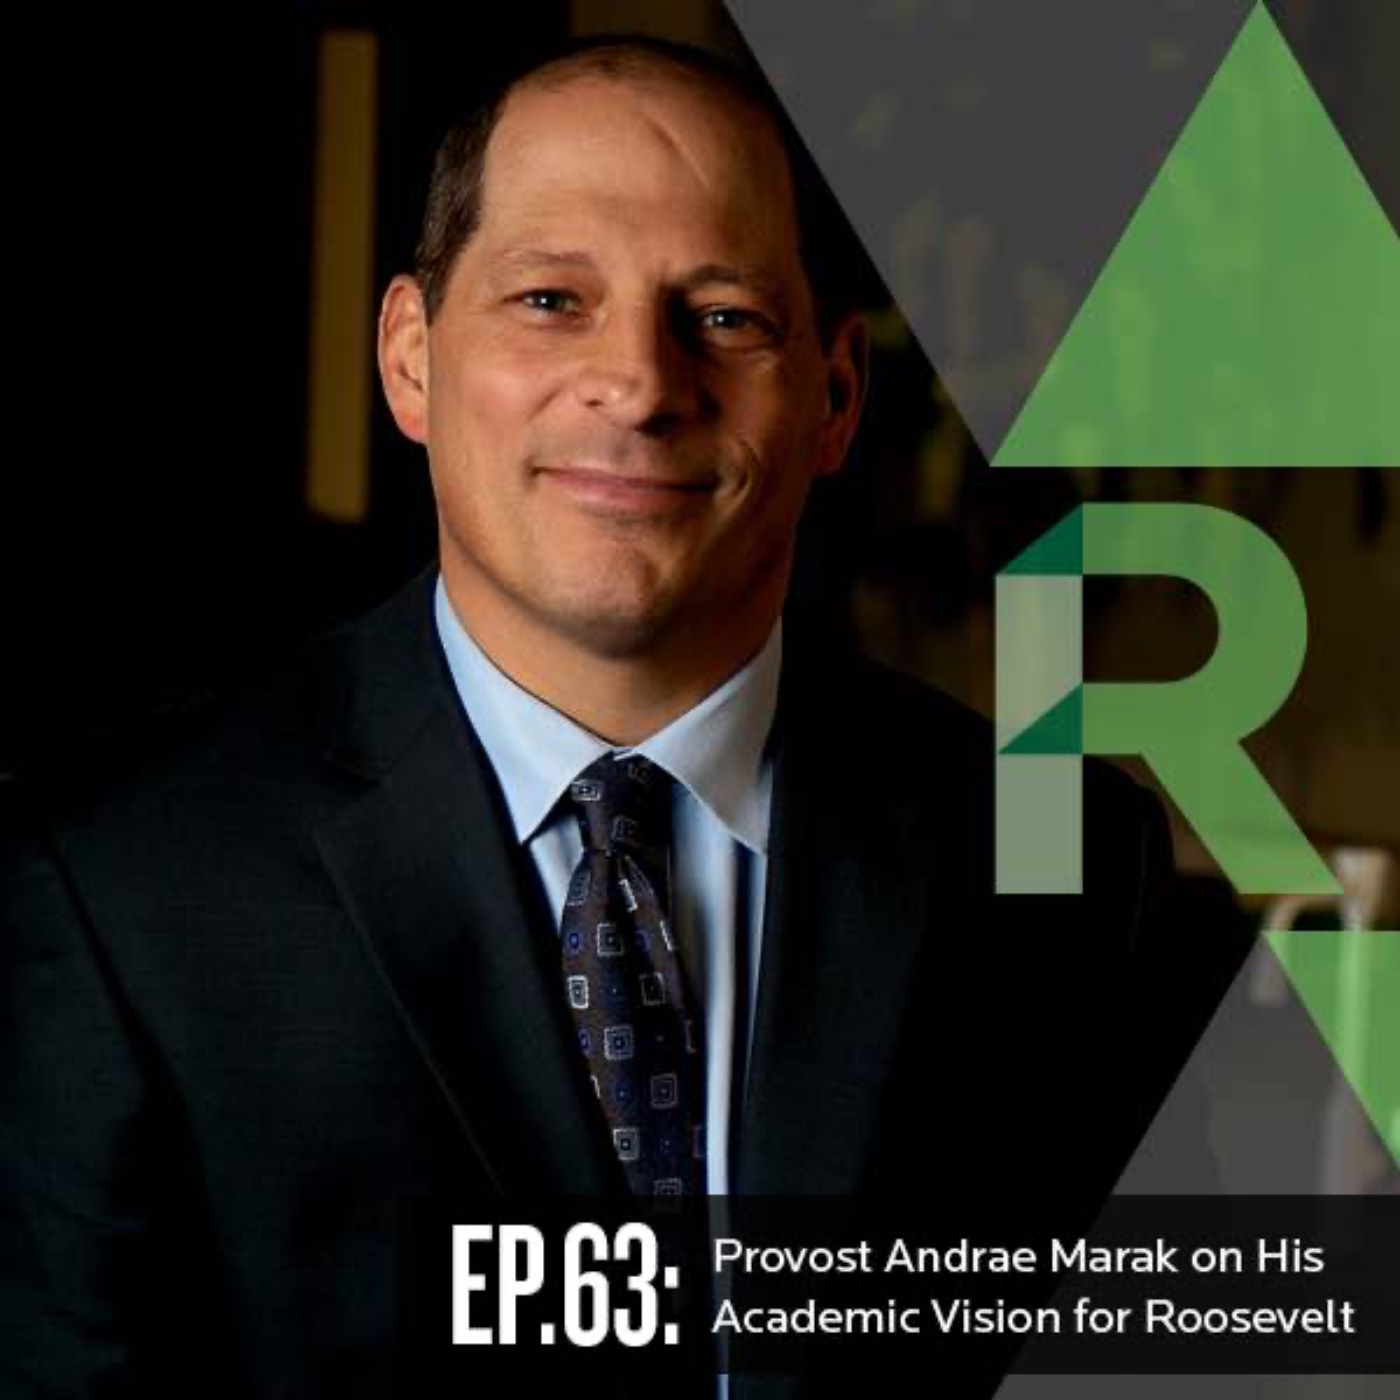 EP. 63: Provost Andrae Marak on His Academic Vision for Roosevelt